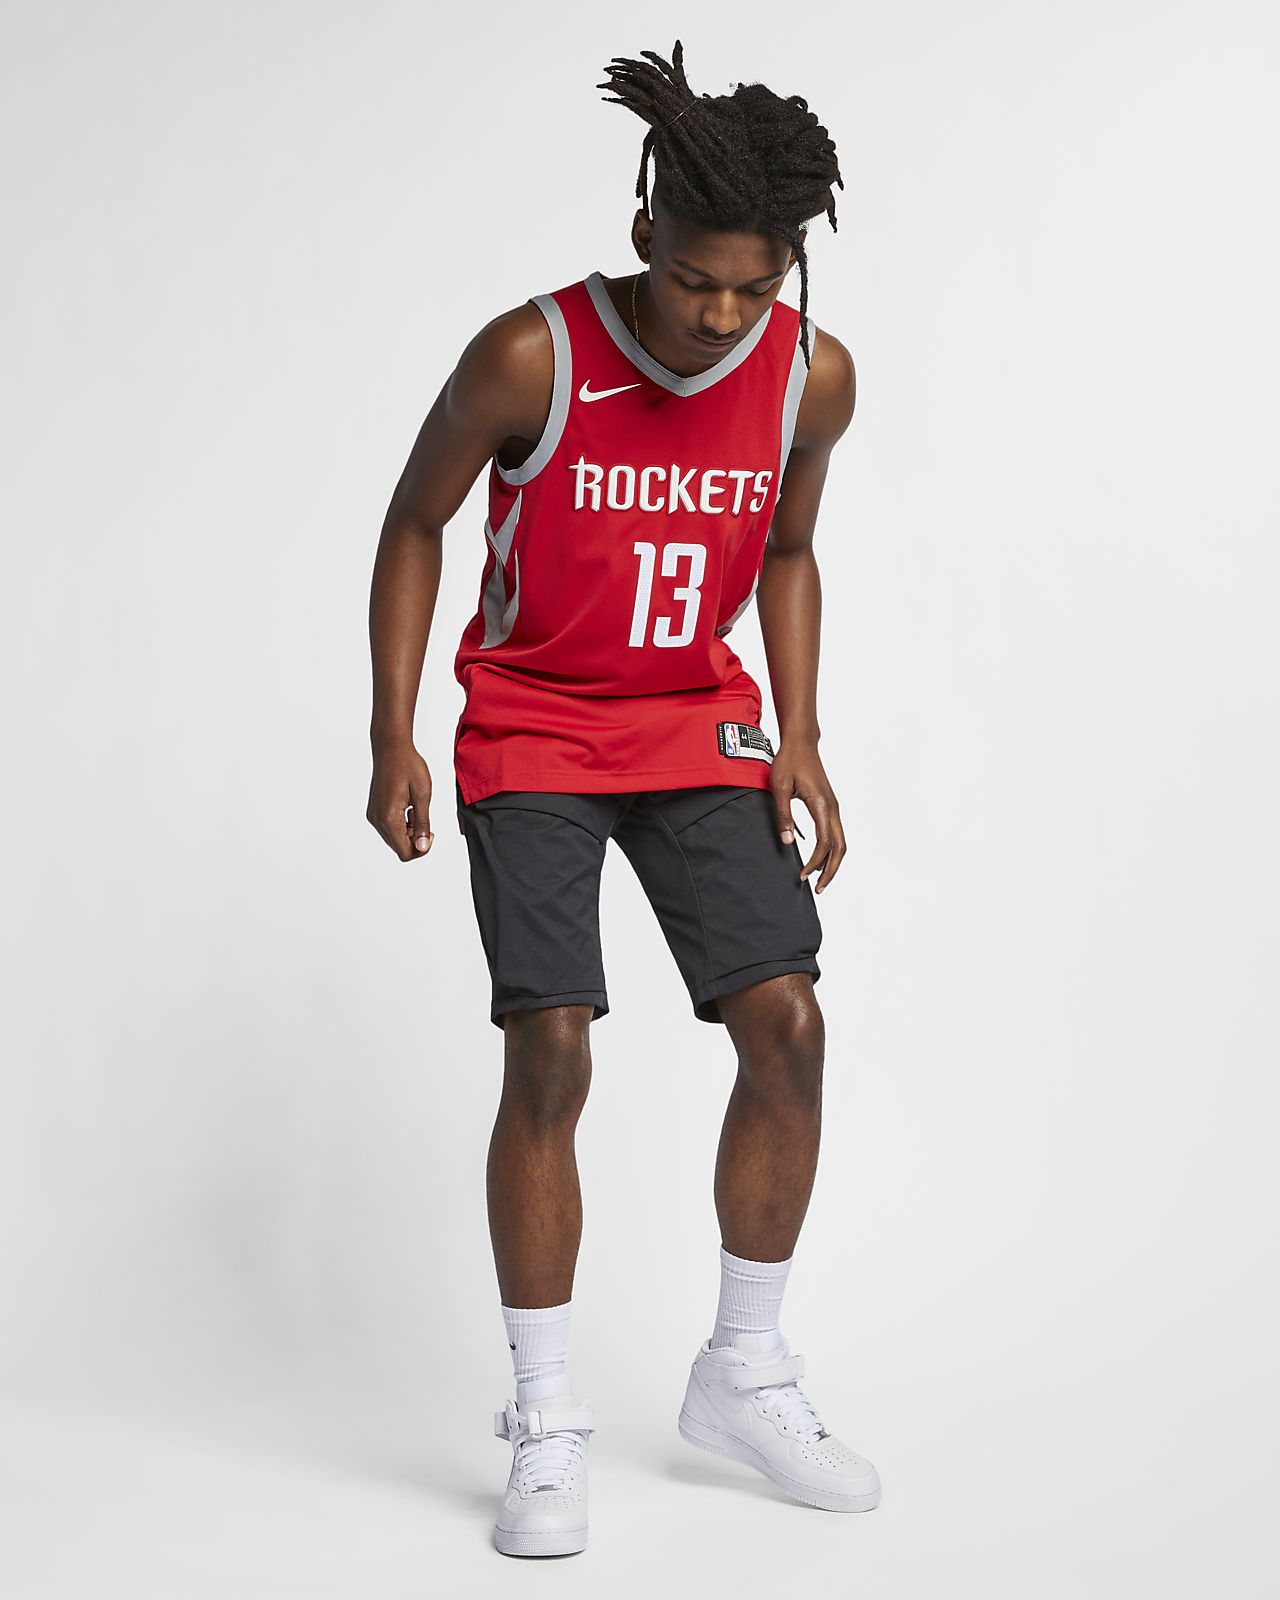 james harden jersey and shorts